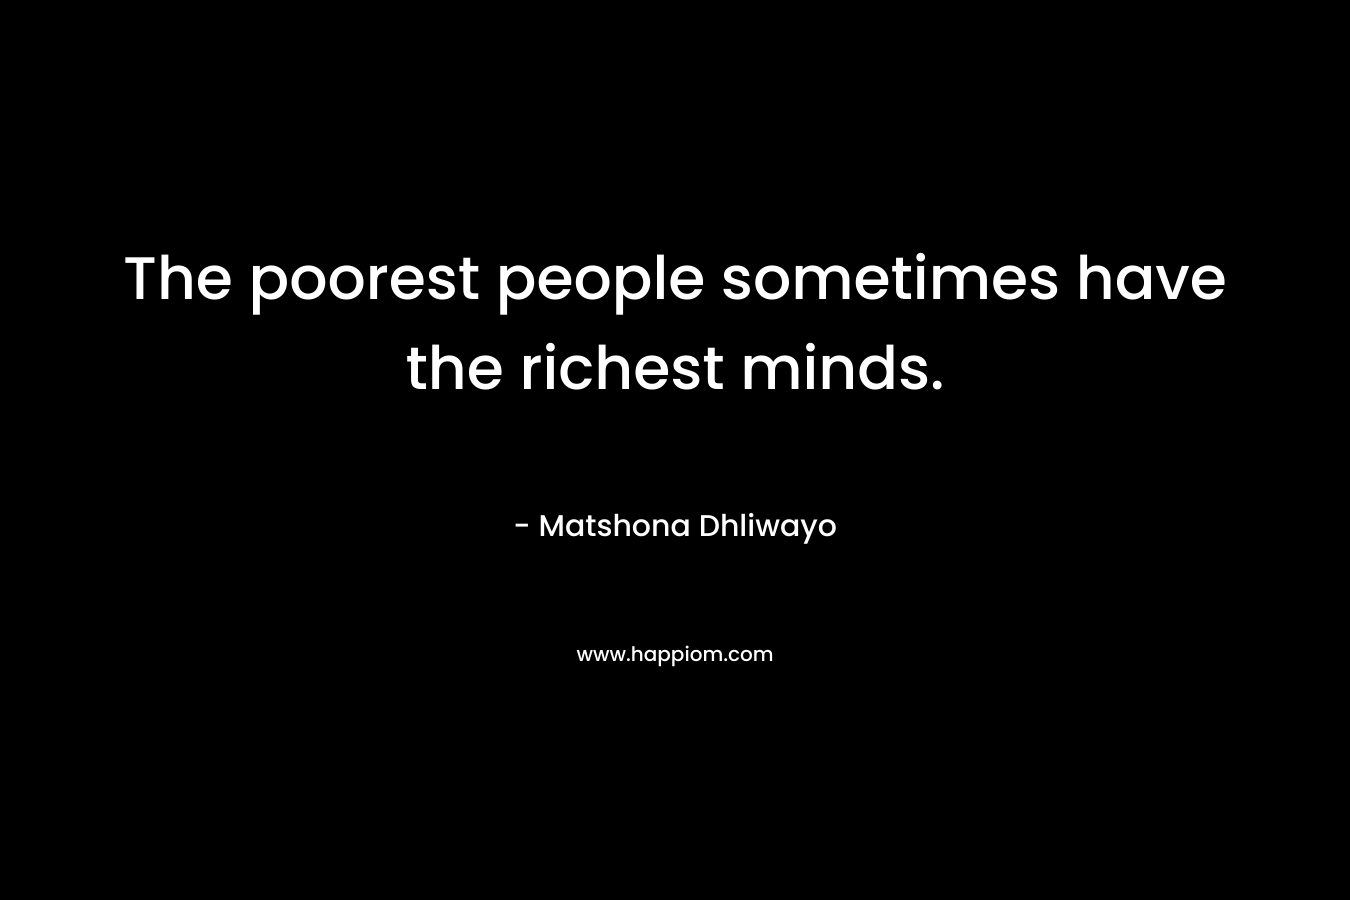 The poorest people sometimes have the richest minds.